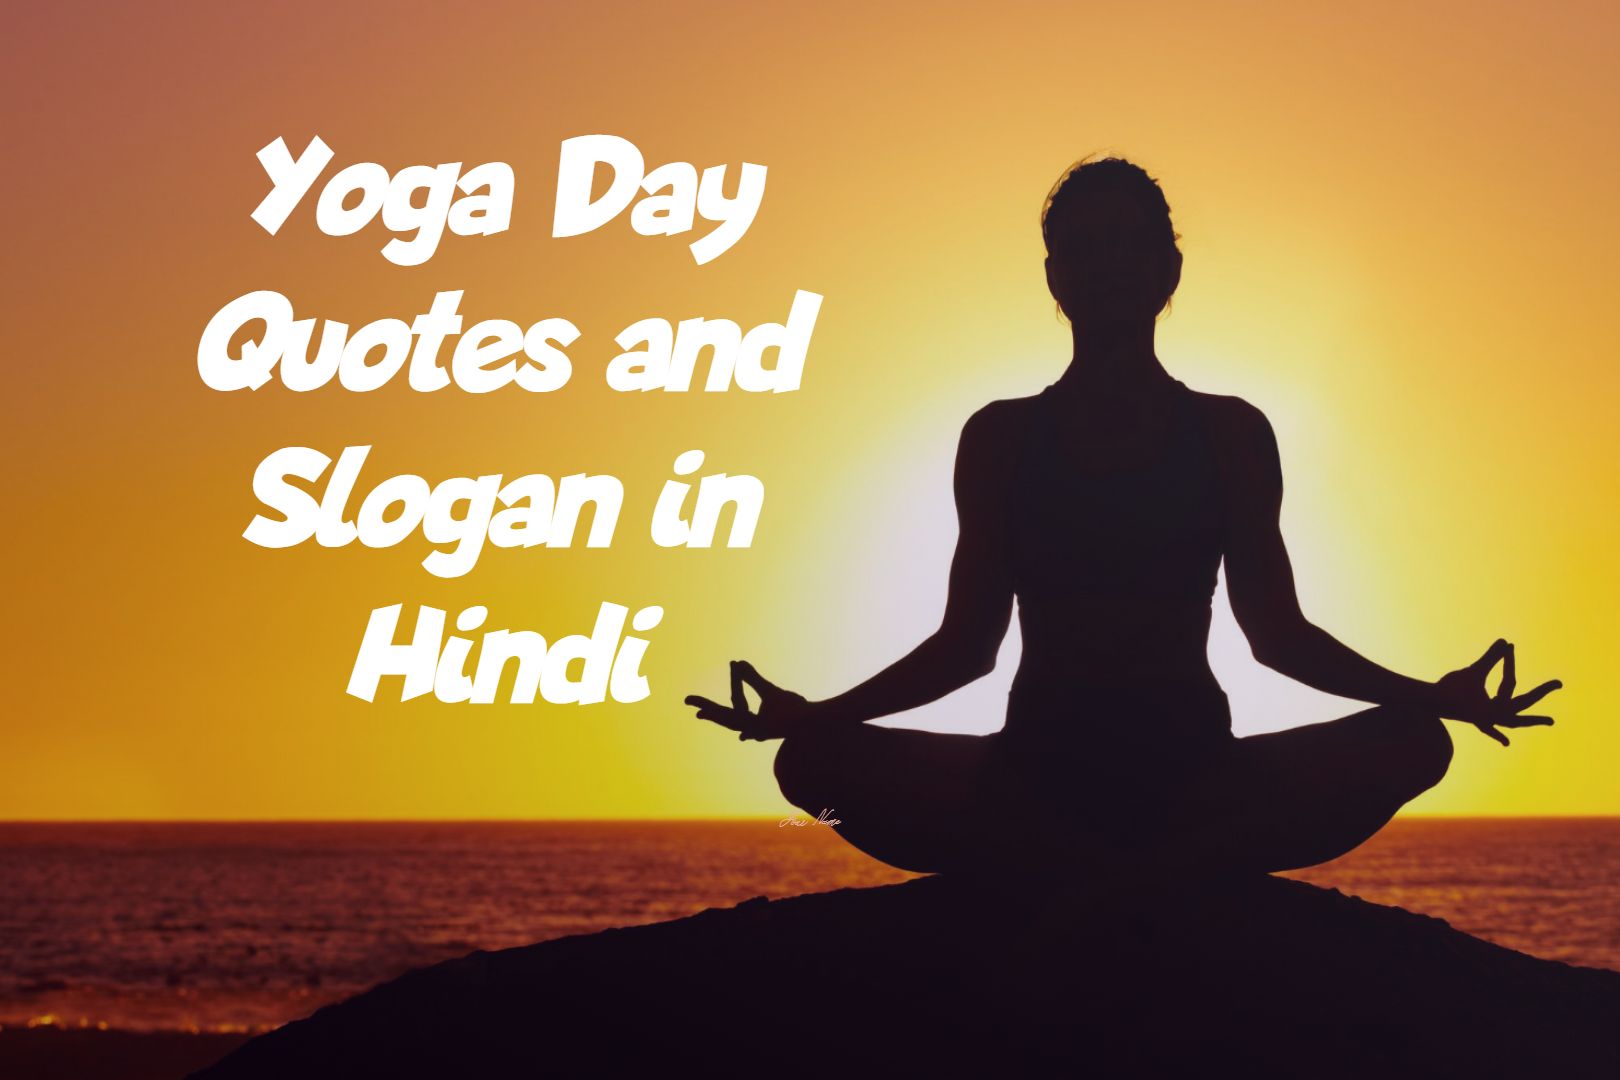 Yoga Day Quotes and Slogan in Hindi